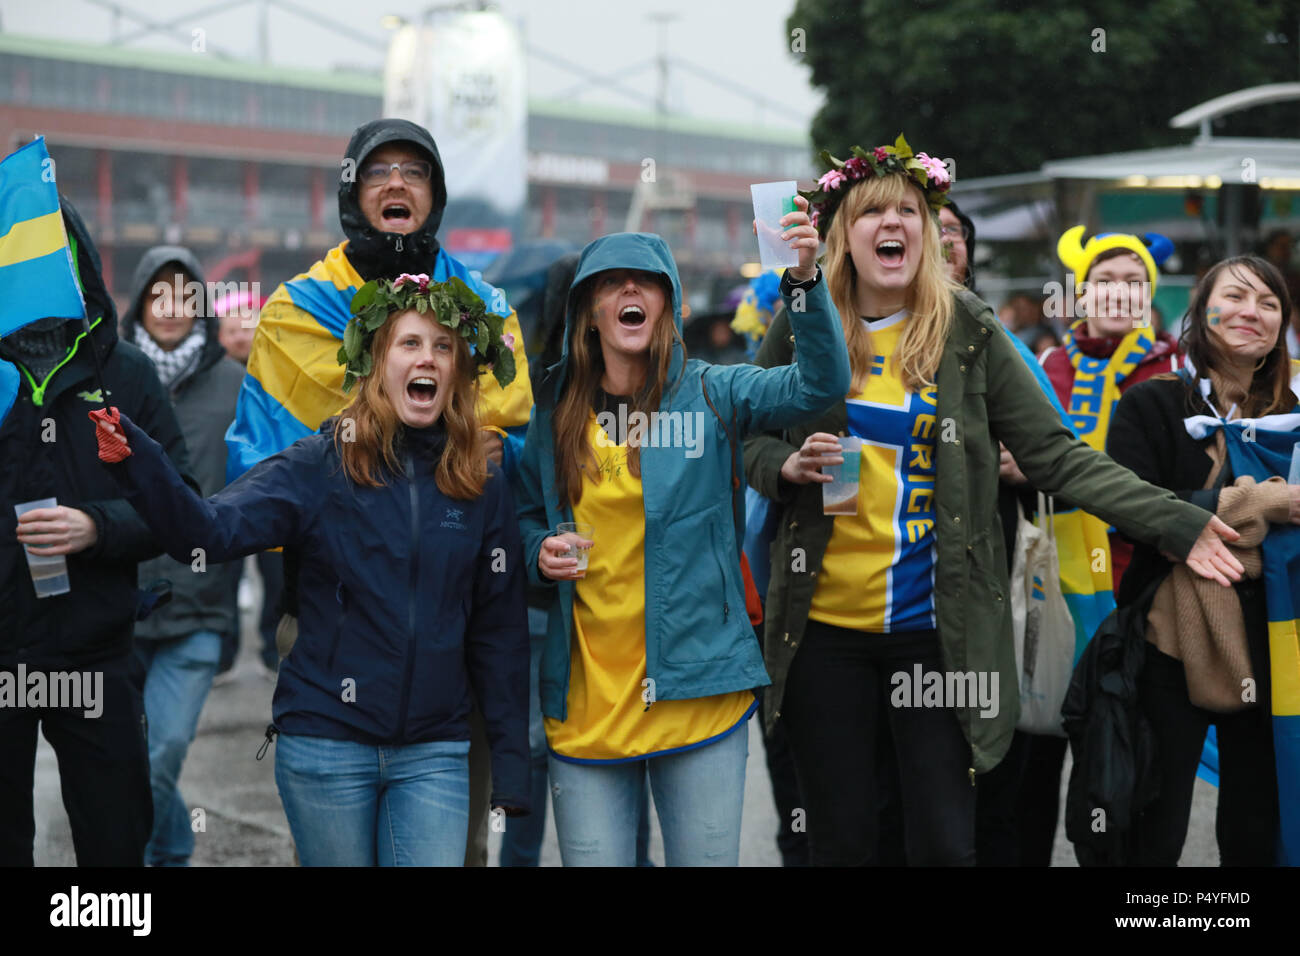 Hamburg, Germany. 23rd June 2018. World Cup, Soccer, Germany vs Sweden, Group Stage, Group F, 2nd match day: Swedish fans Anna, Andrea and Annsofi cheer on their team. Photo: Paul Weidenbaum/dpa Credit: dpa picture alliance/Alamy Live News Stock Photo